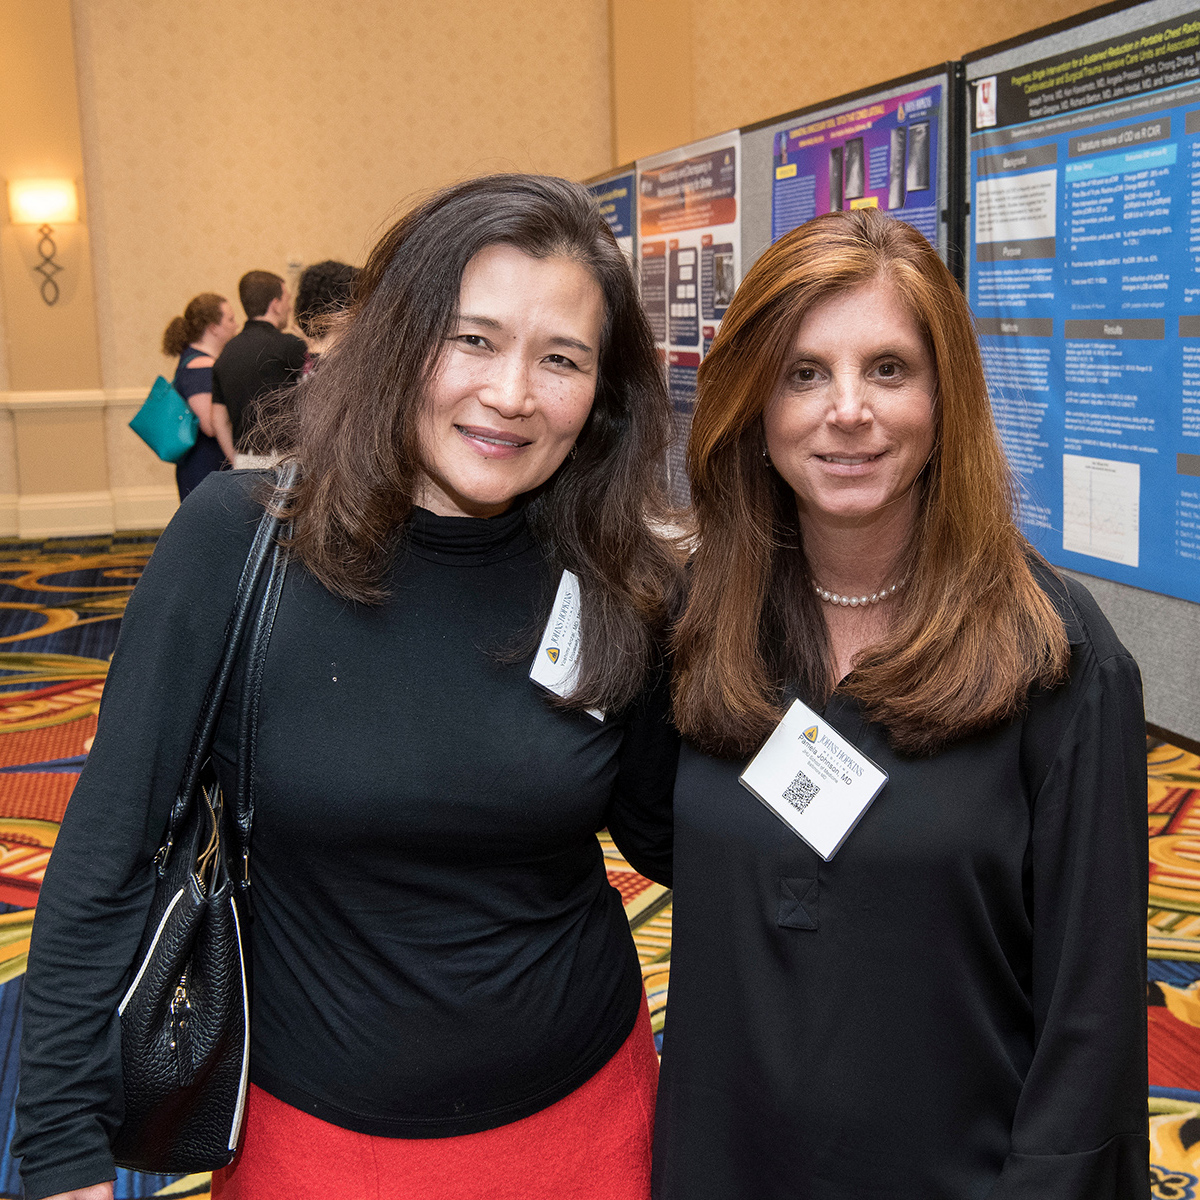 Photos shows Yoshimi Anzai, associate chief medical quality officer at University of Utah Health Care, and conference organizer Pamela Johnson, vice chair of quality and safety in radiology at Johns Hopkins University School of Medicine, discussing improvements and innovations during the poster session.